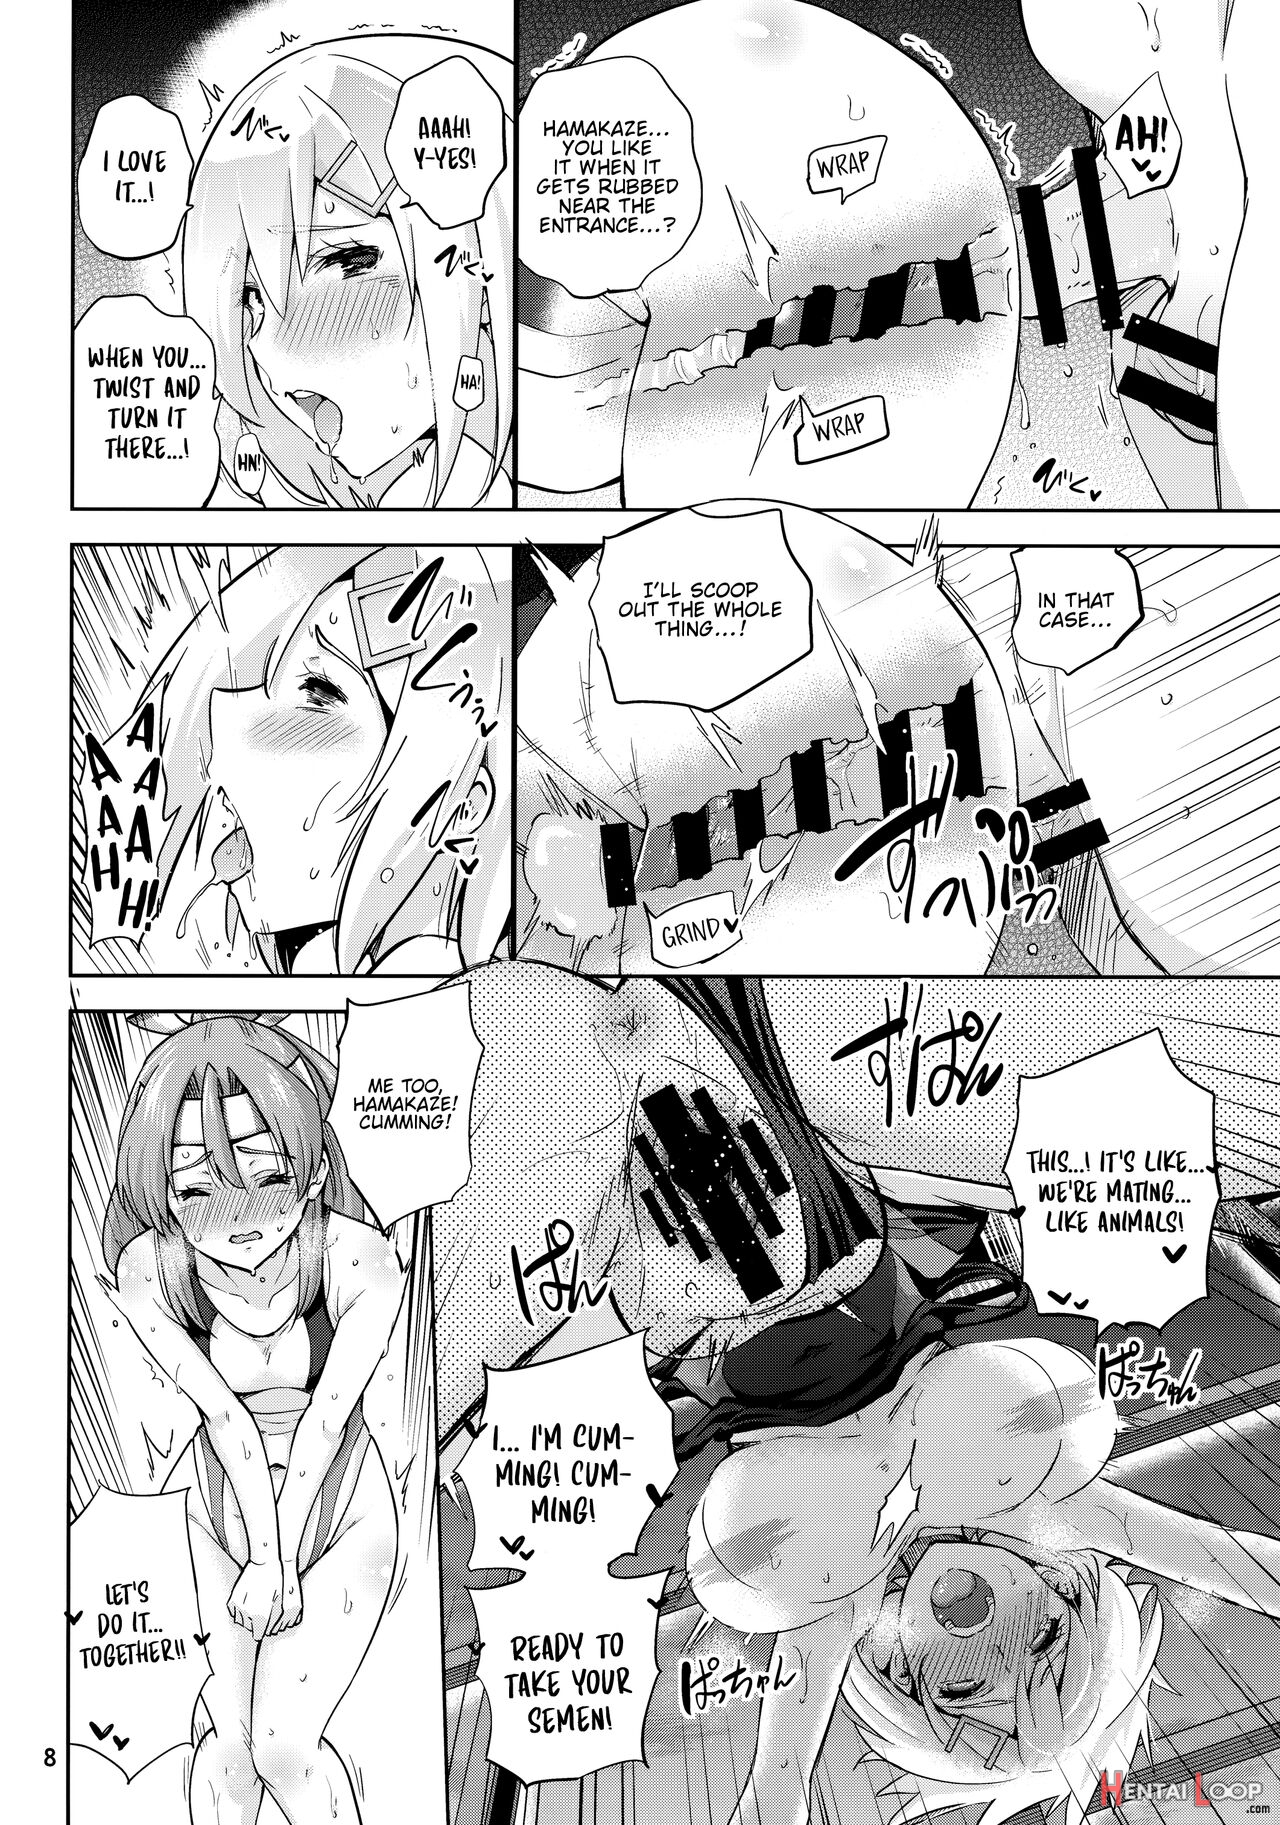 Zuihou And Hamakaze In Racing Swimsuits. page 10